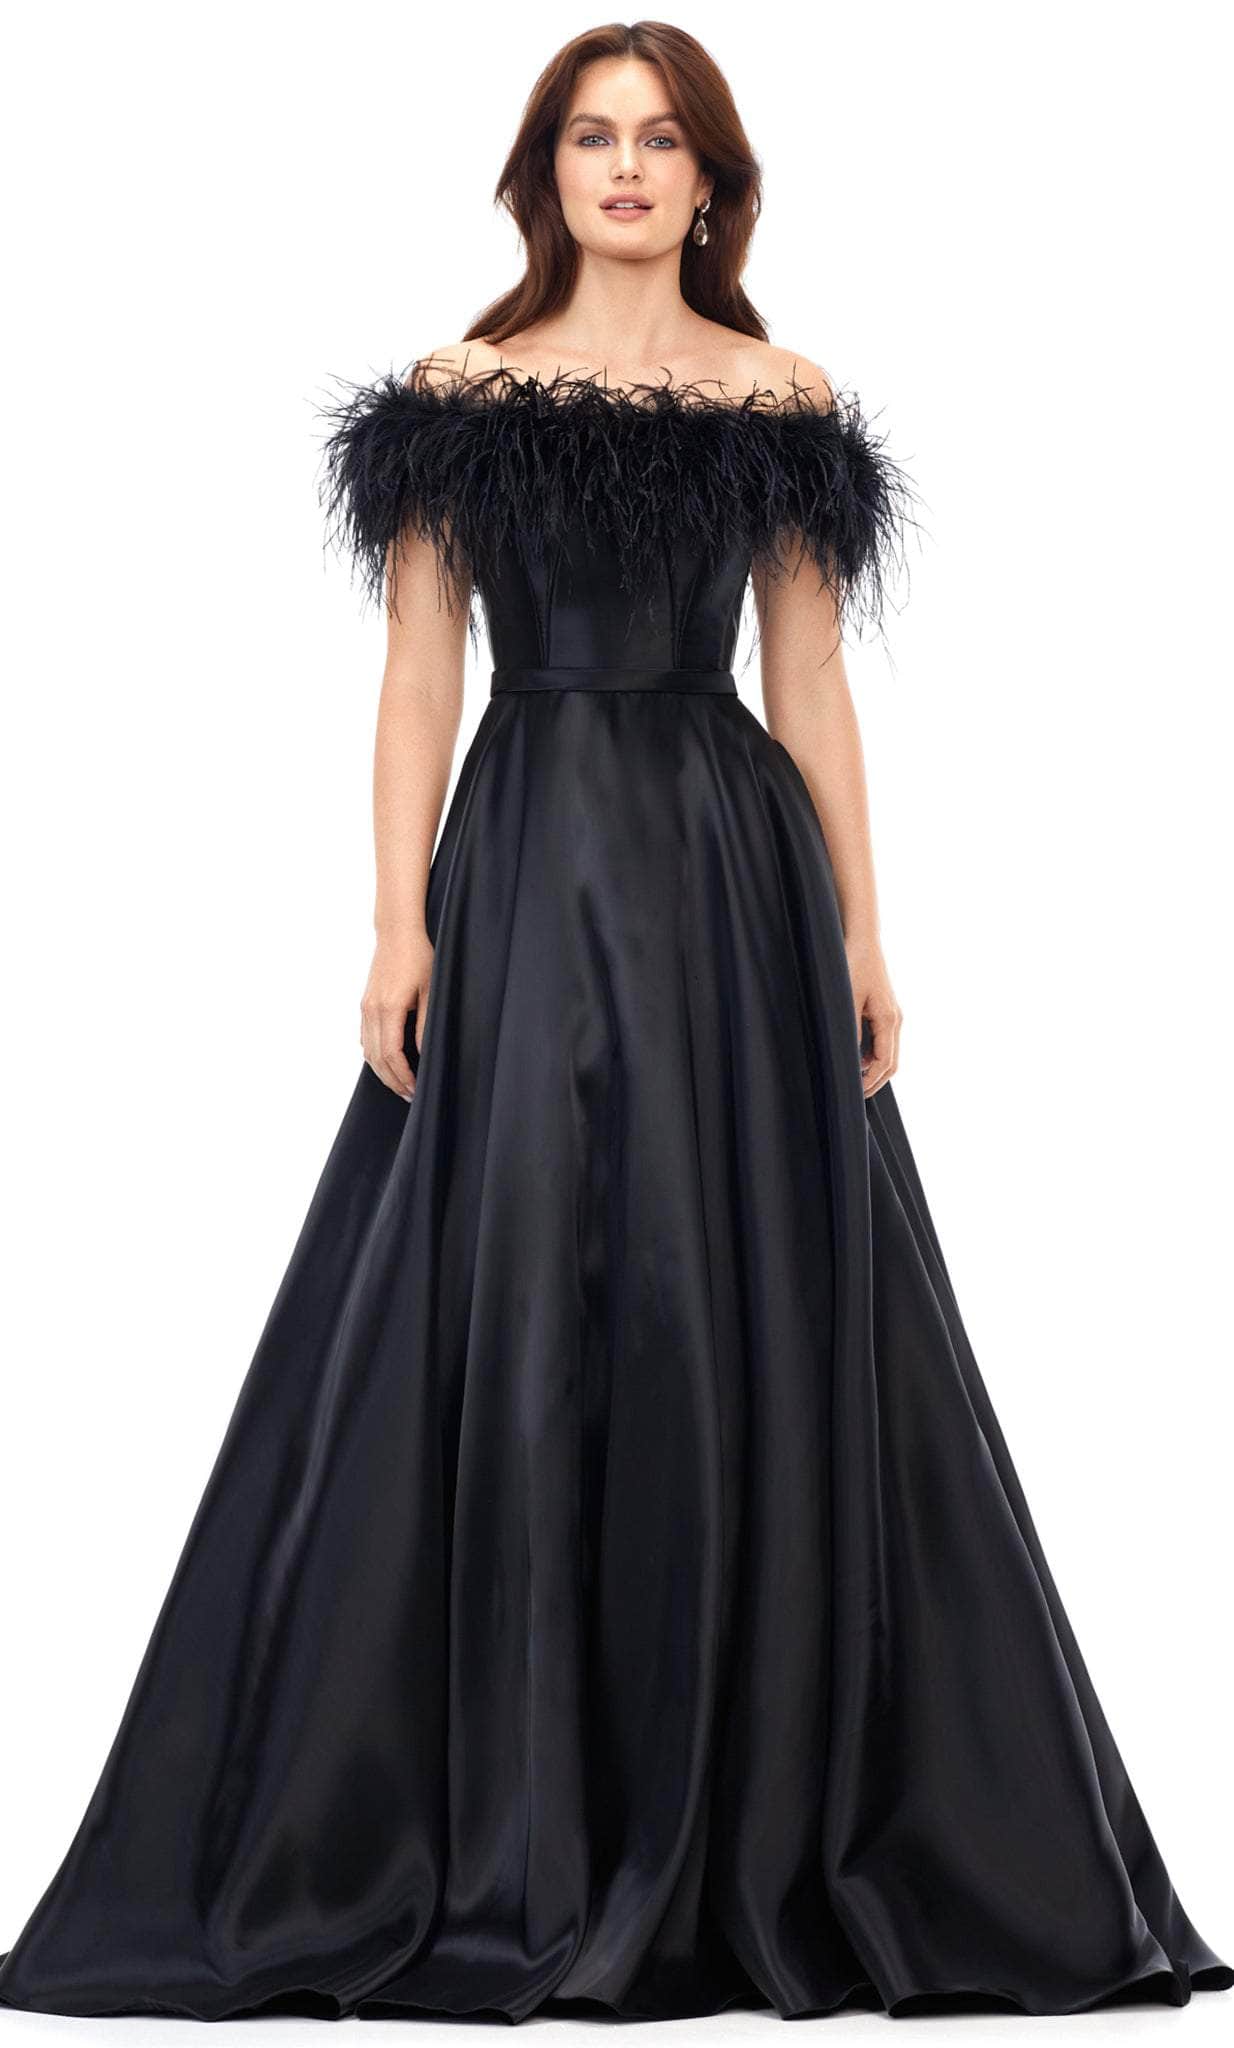 Ashley Lauren 11382 - Feathered Off-Shoulder Ballgown Special Occasion Dress 0 / Black